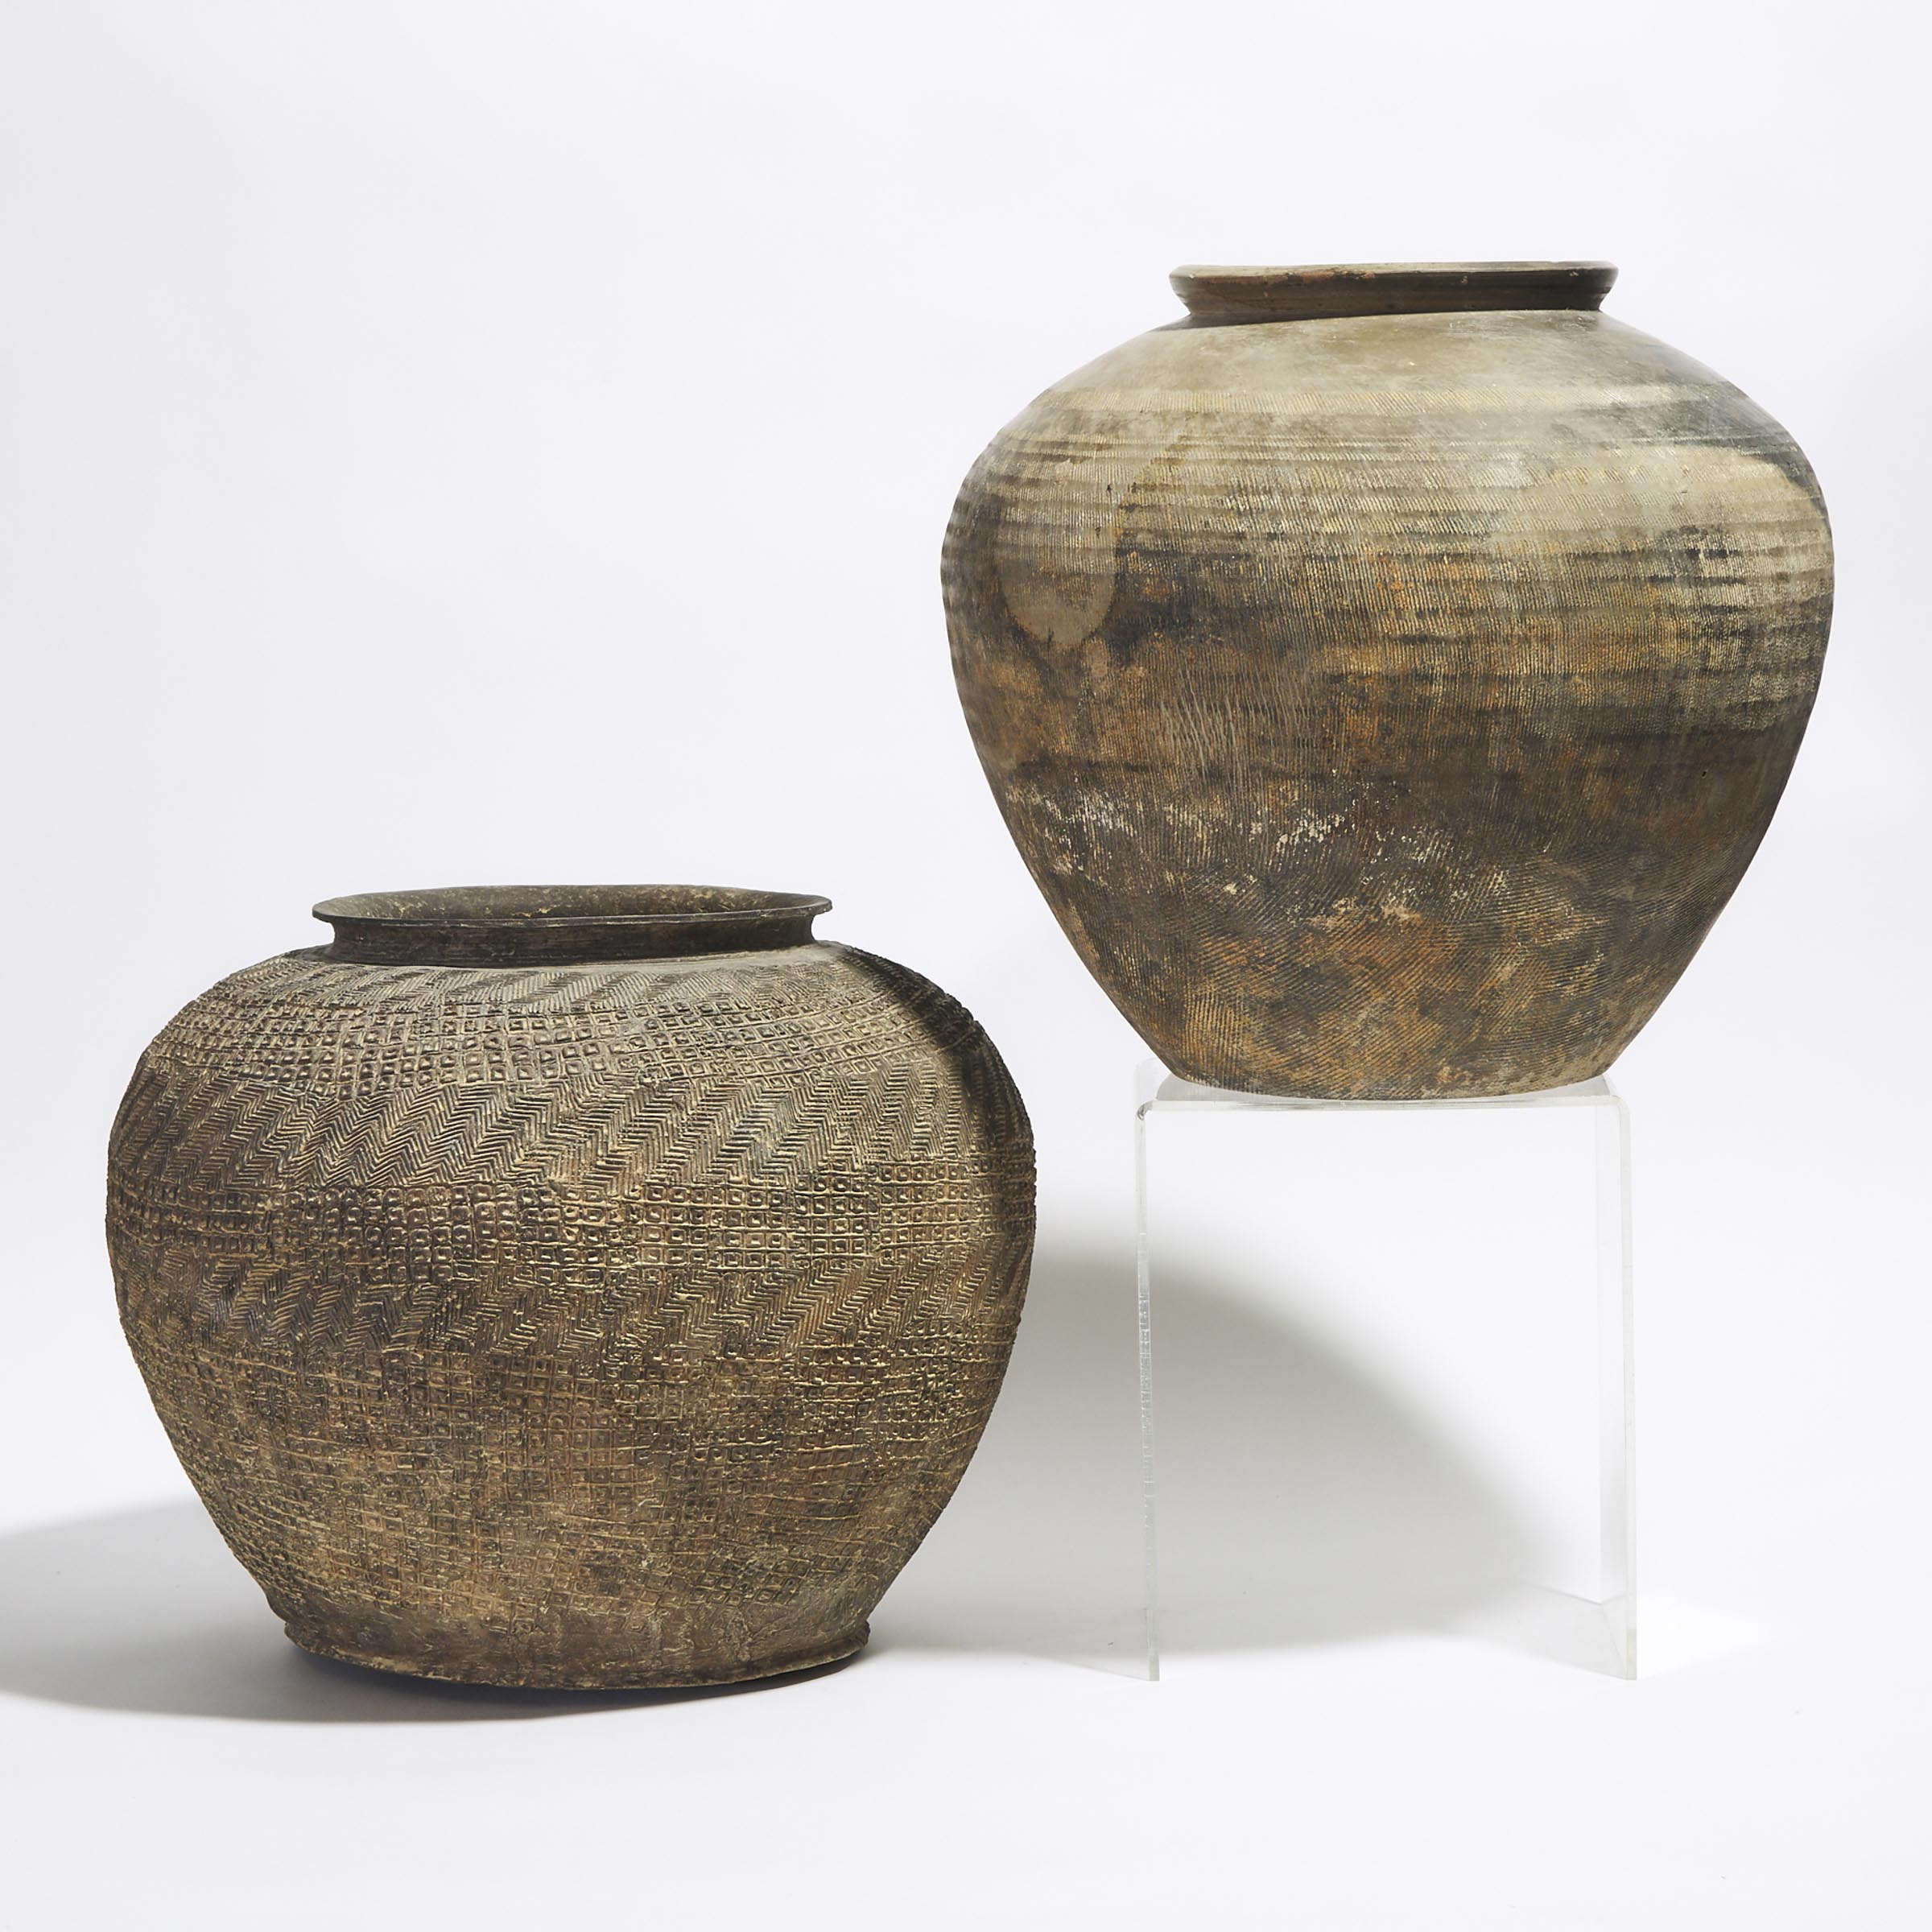 Two Large Pottery Jars, Warring States Period (475-221 BC)